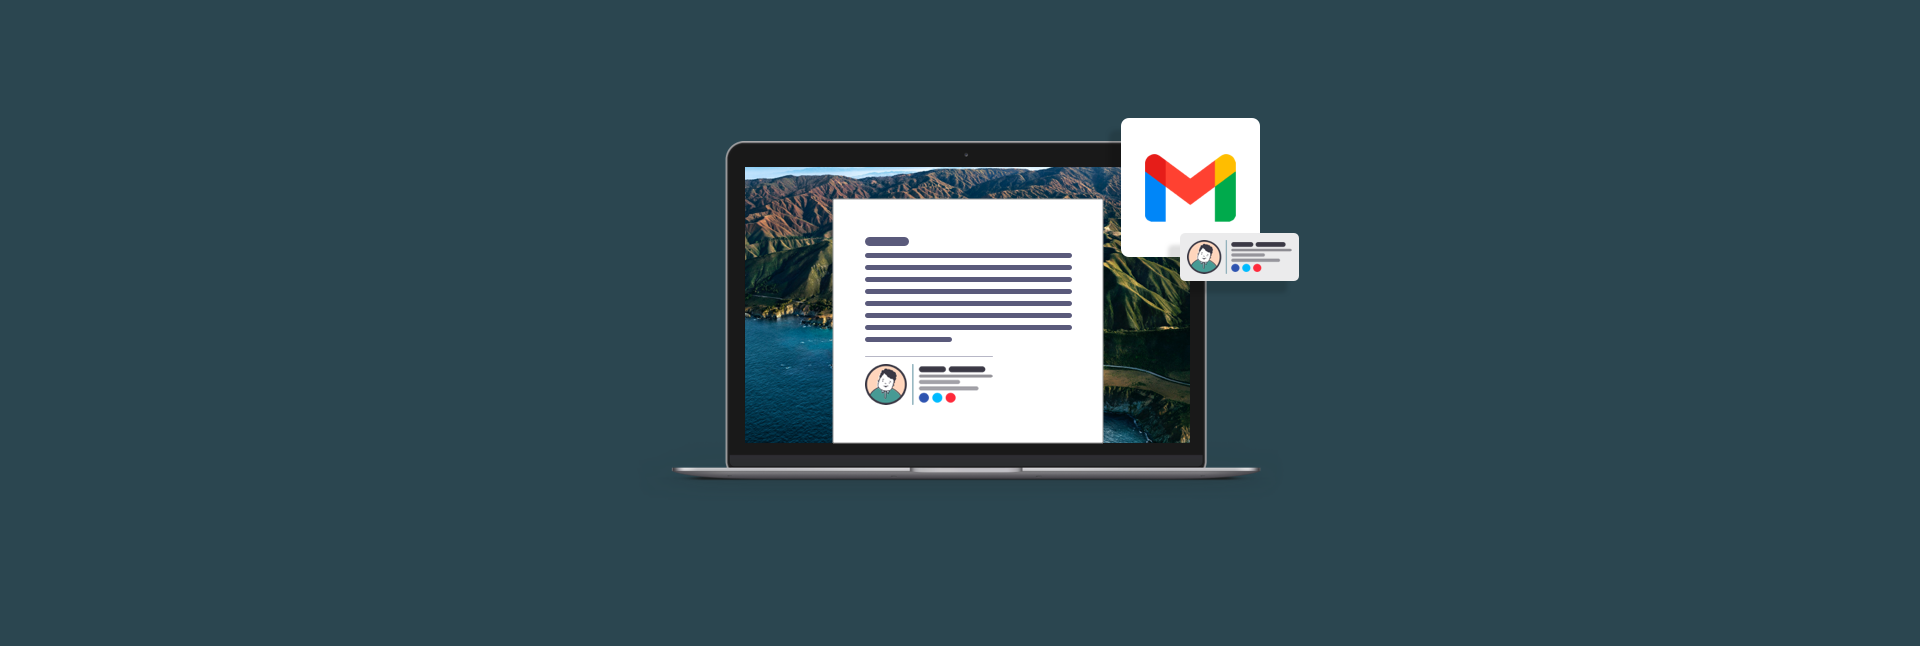 how to change signature in gmail on mac